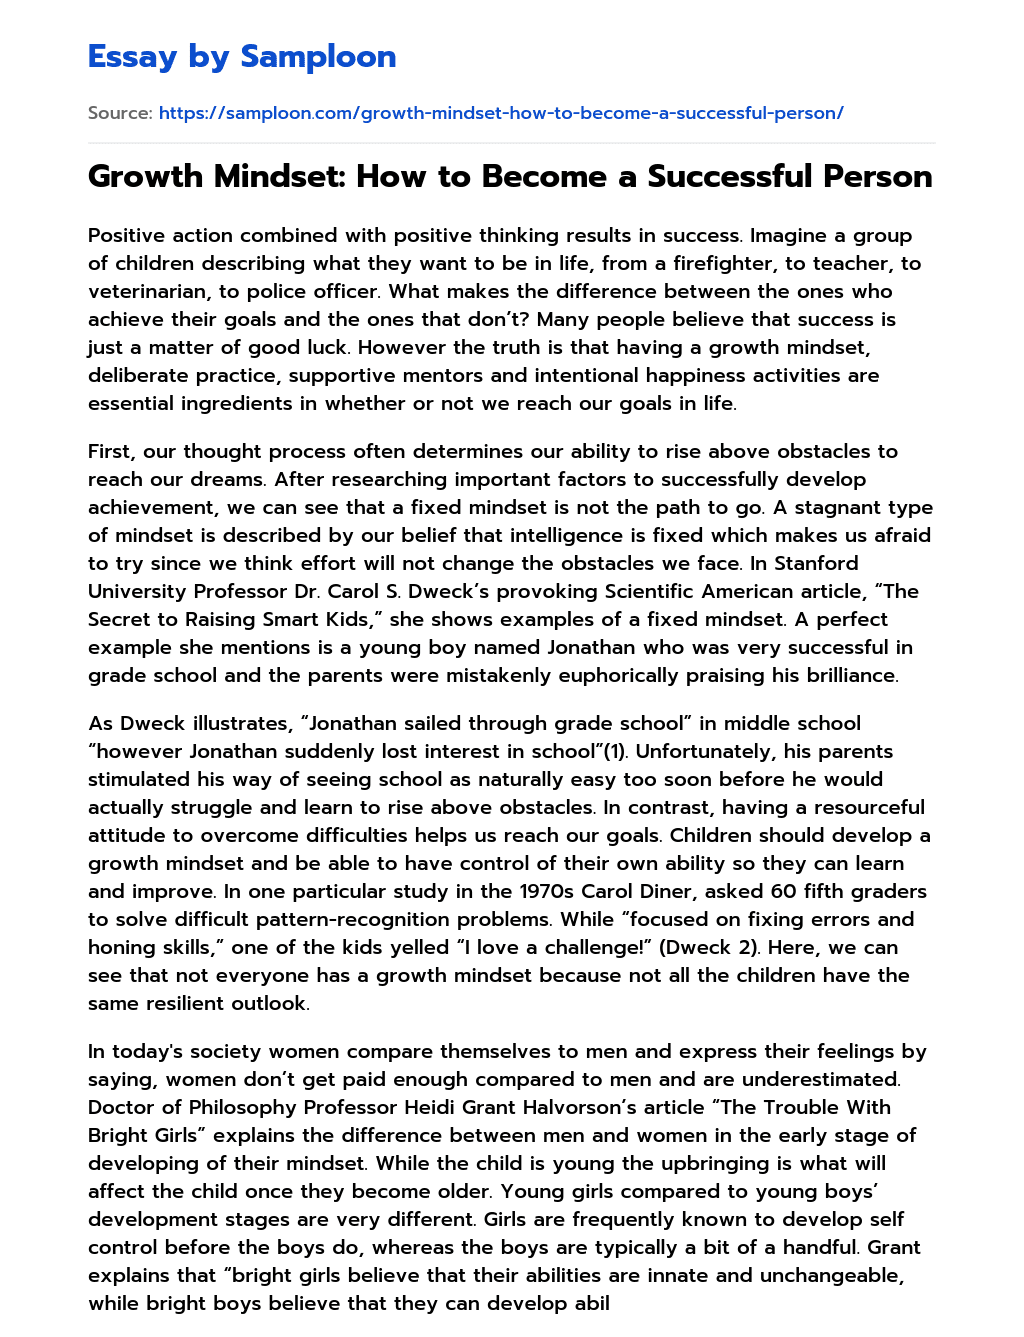 how to be a successful person essay